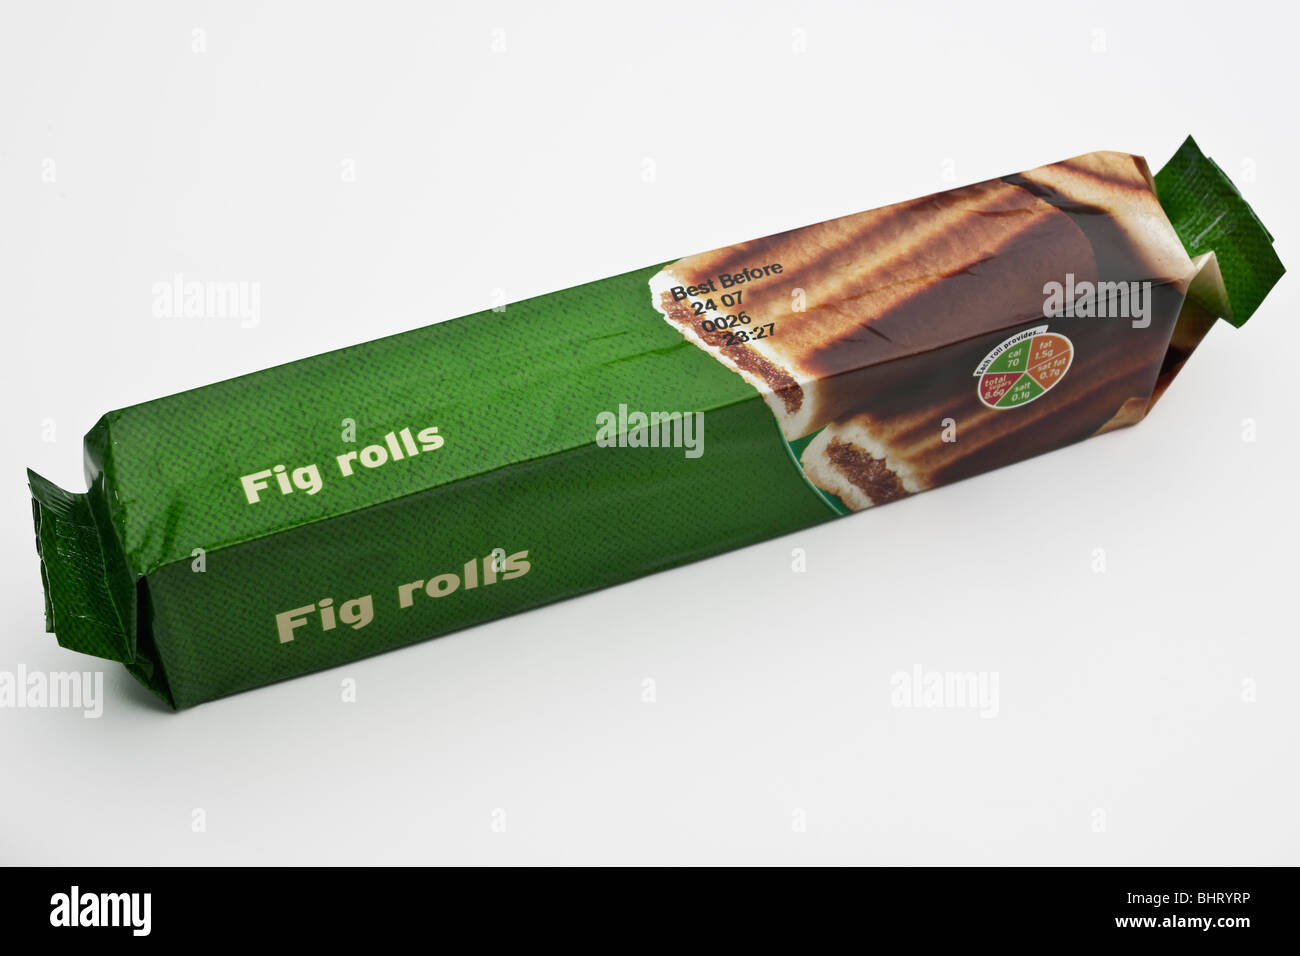 Packet of fig rolls Stock Photo - Alamy